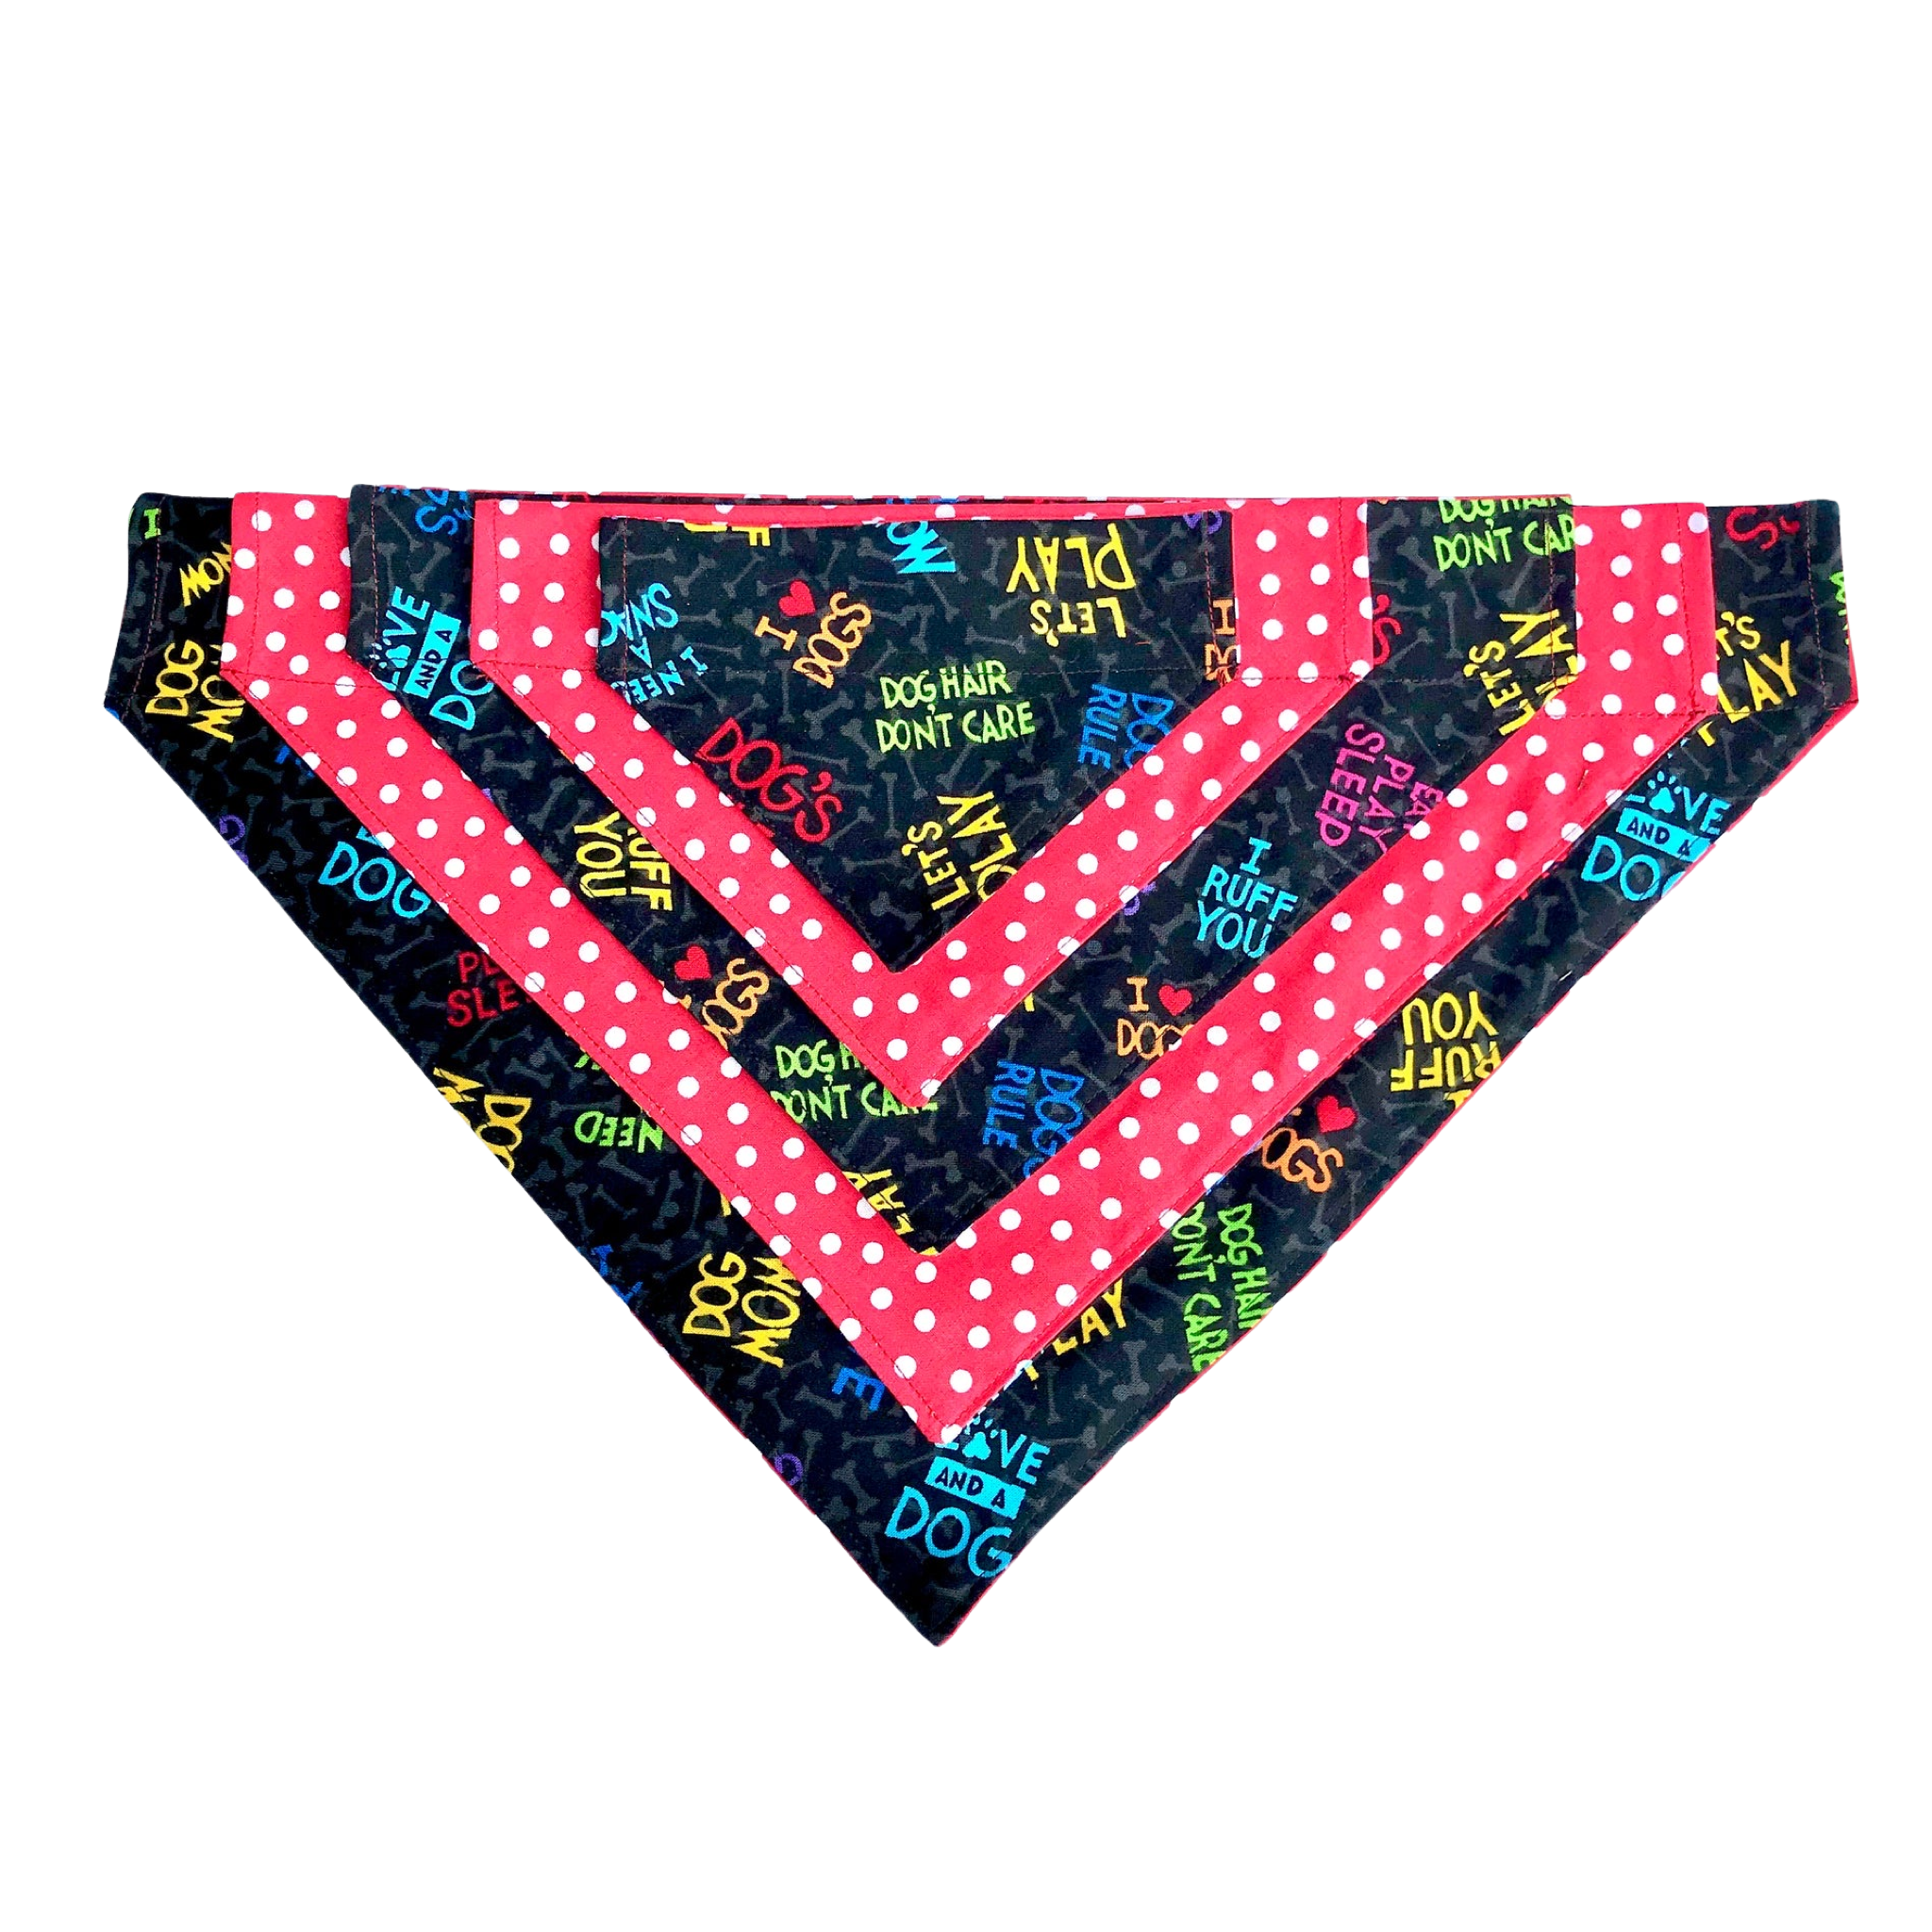 Reversible Dog Scarf - Dogs Rule/Red Dot